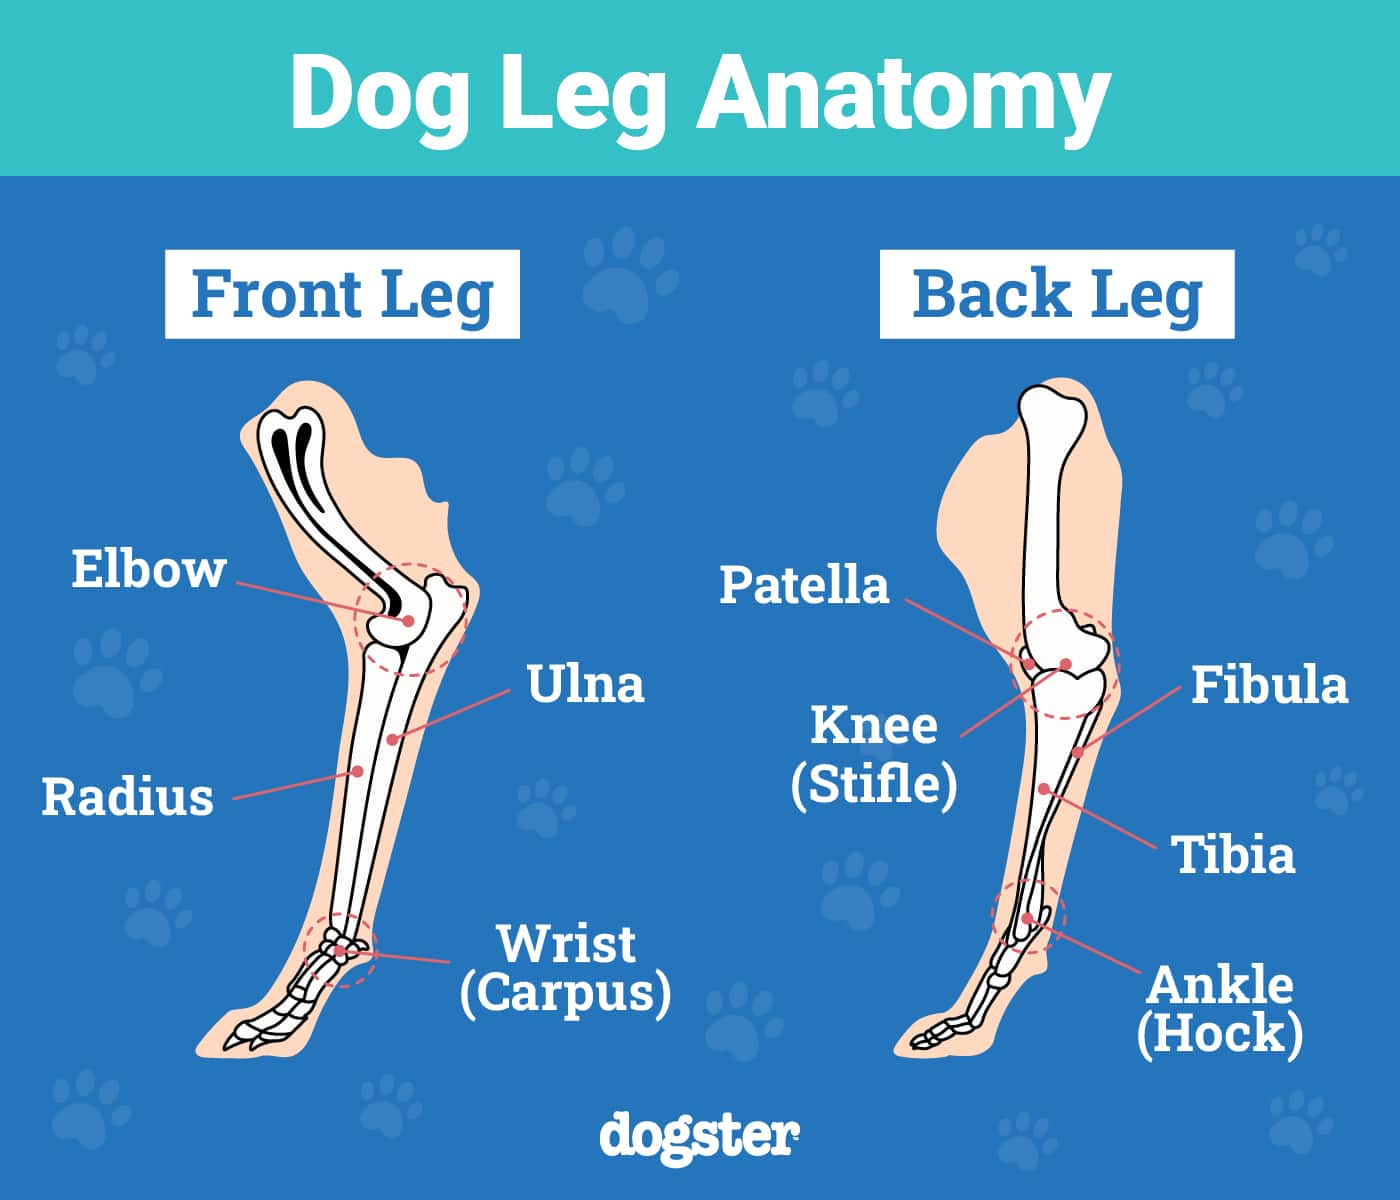 How Many Legs Does a Dog Have? Canine Anatomy Explained – Dogster